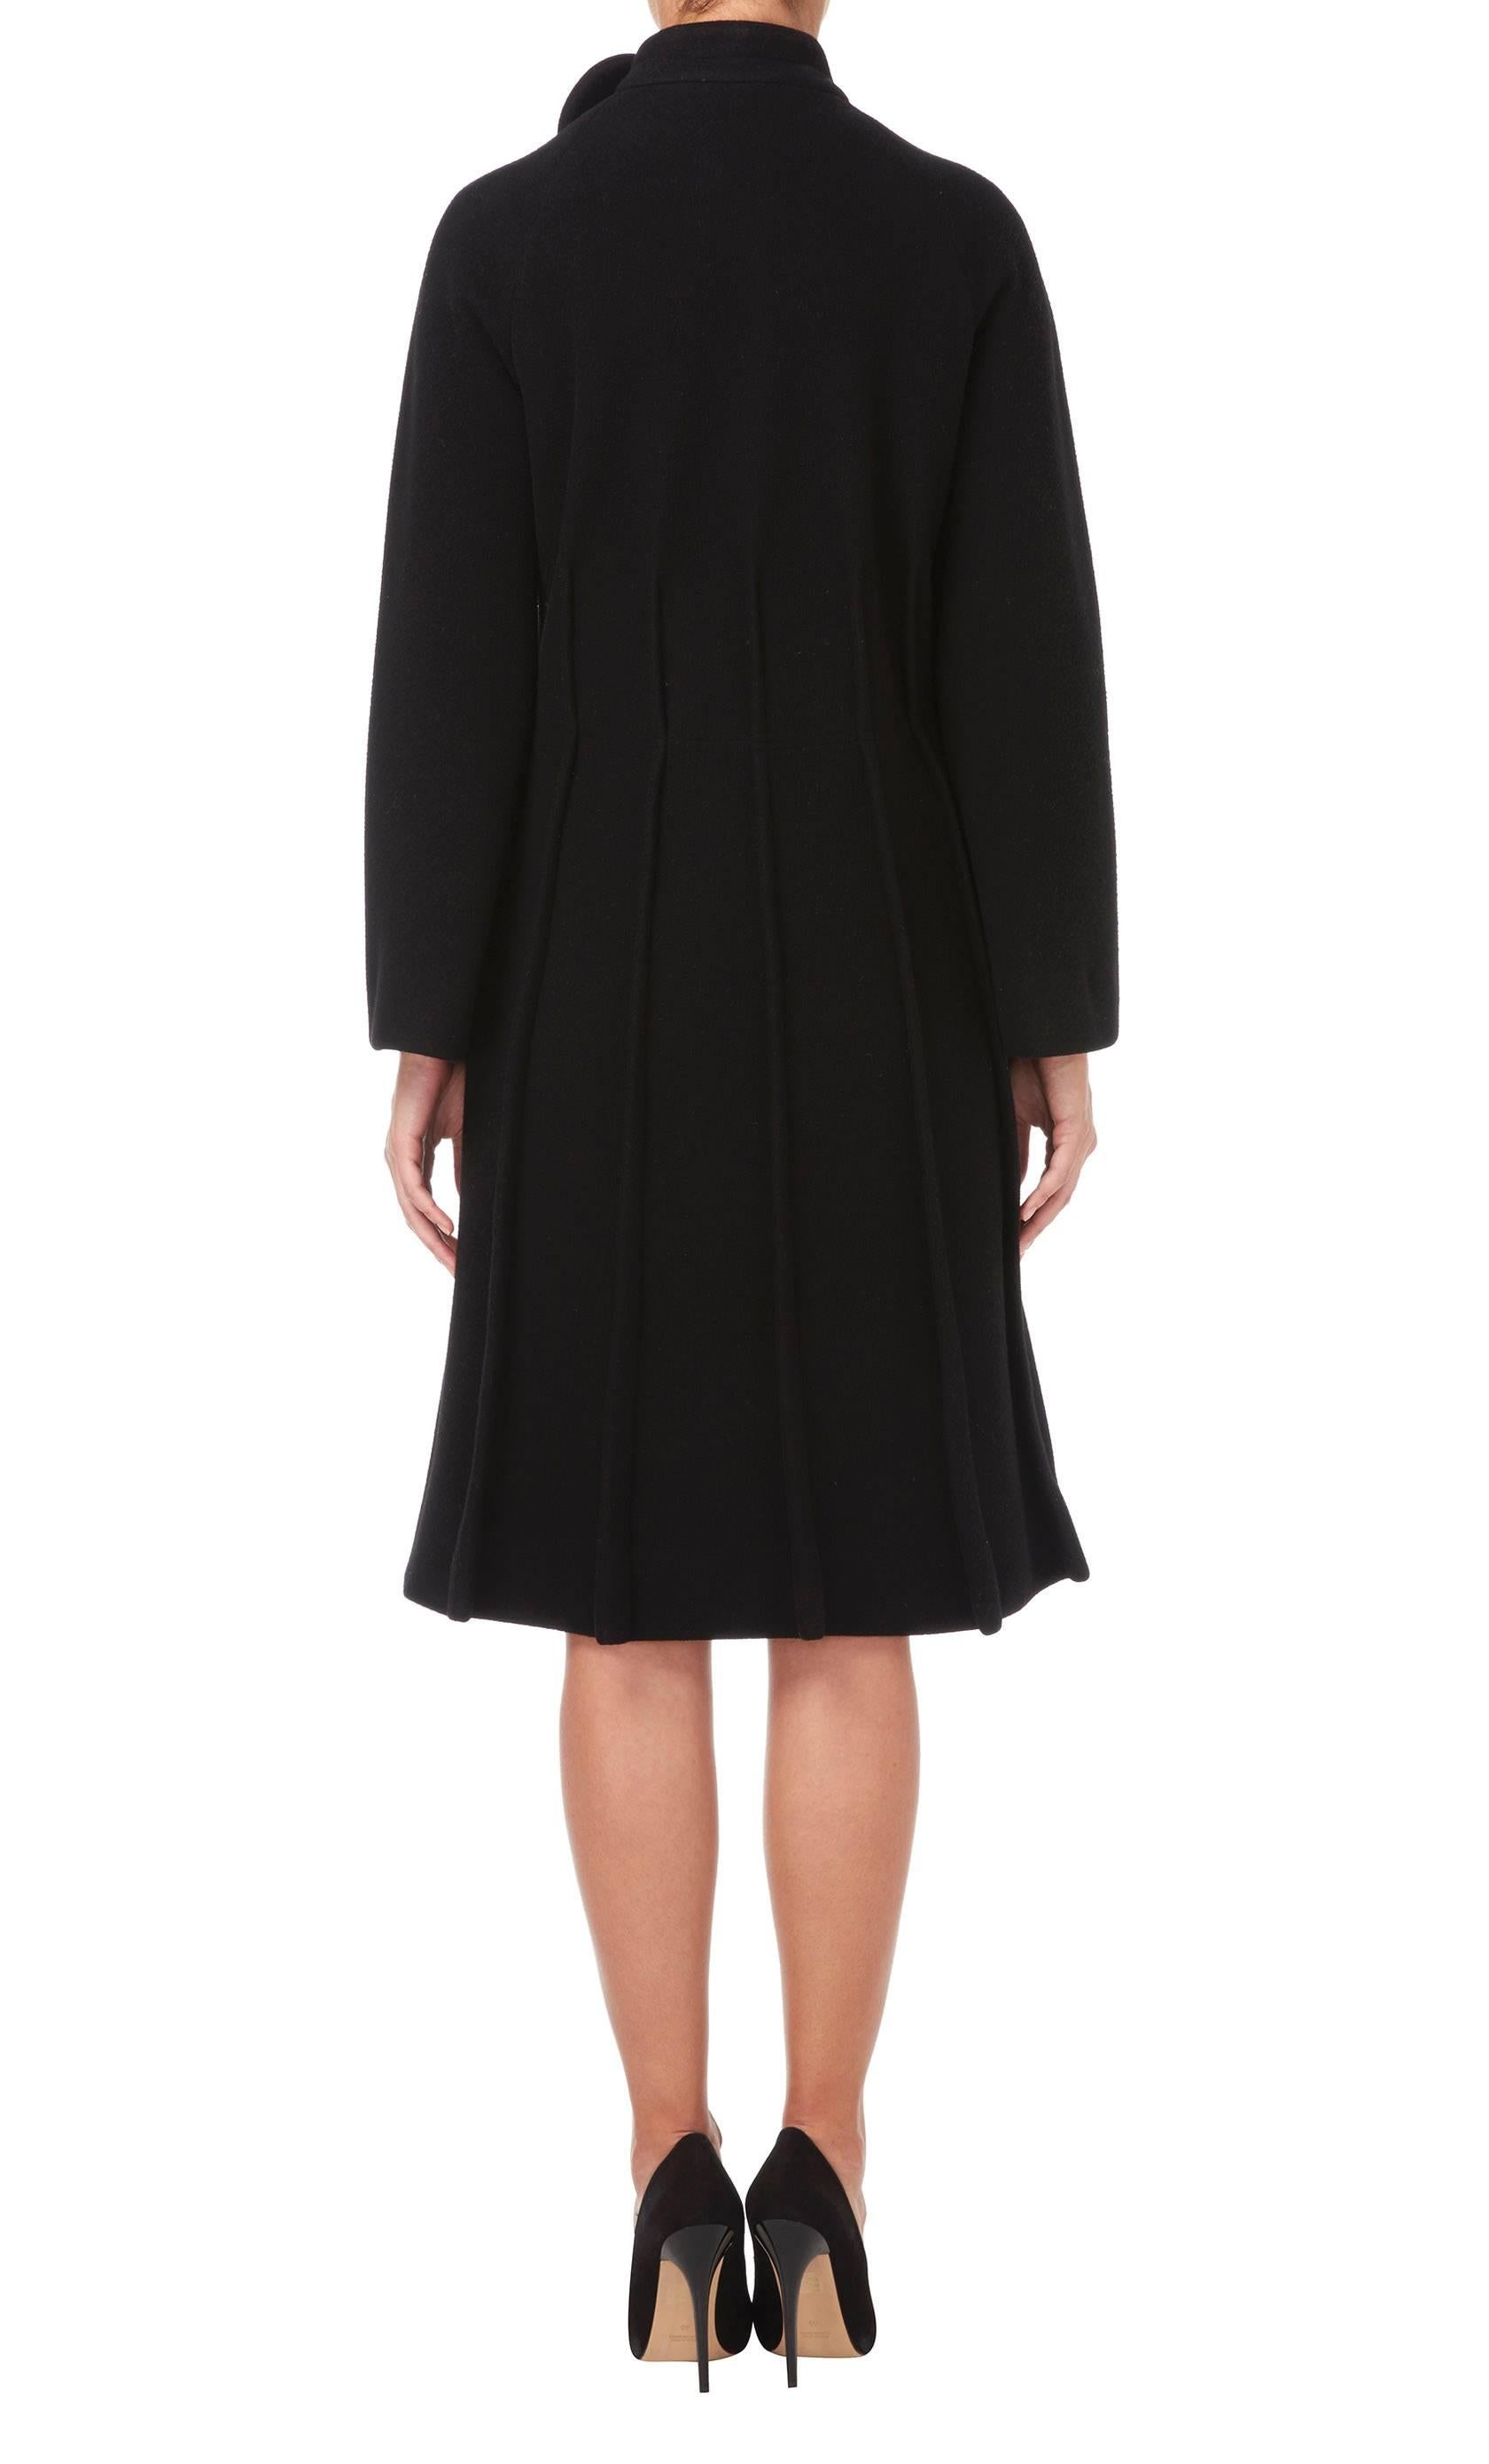 An amazing example of Pierre Cardin's modernist aesthetic, this black wool coat has a fantastic silhouette. Inverted seam detailing from the waist down creates a pleated effect, while a circle motif on the standing collar is indicative of Cardin's